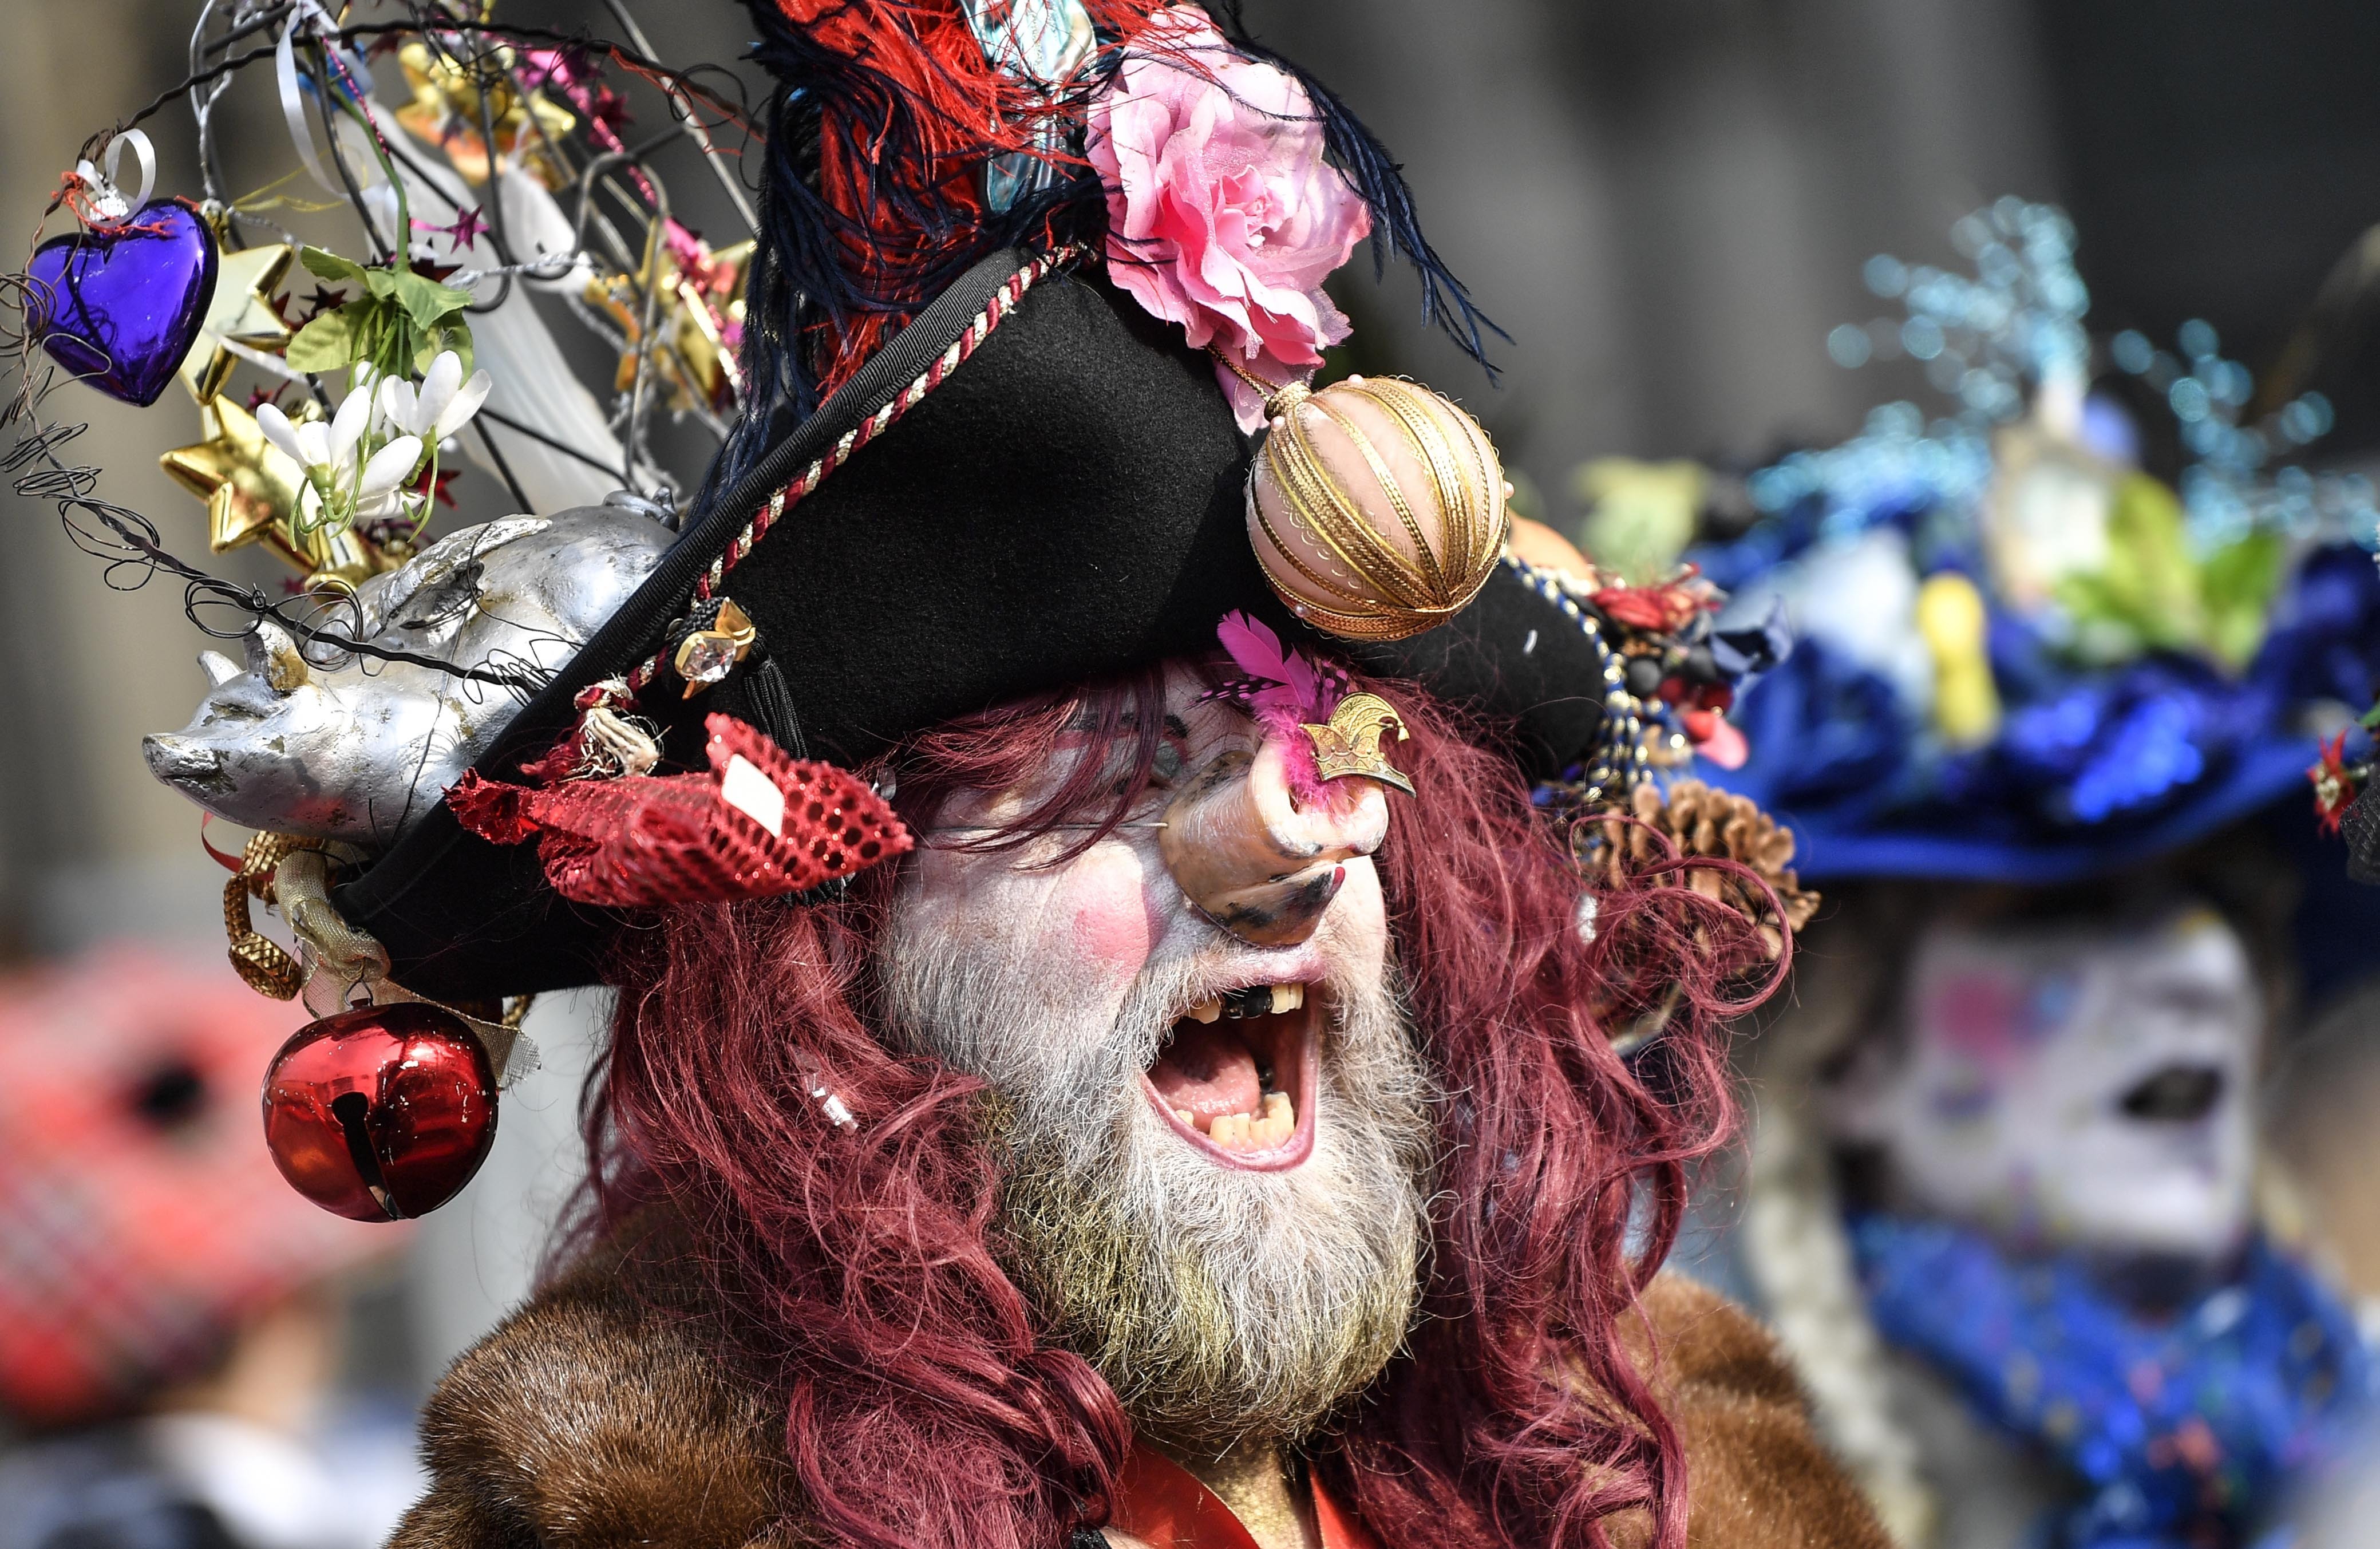 A man in pirate costume sings in Cologne's city center when thousands of revelers in carnival costumes celebrate the start of the street carnival in Cologne, Germany, Thursday, Feb. 28, 2019. (AP Photo/Martin Meissner)